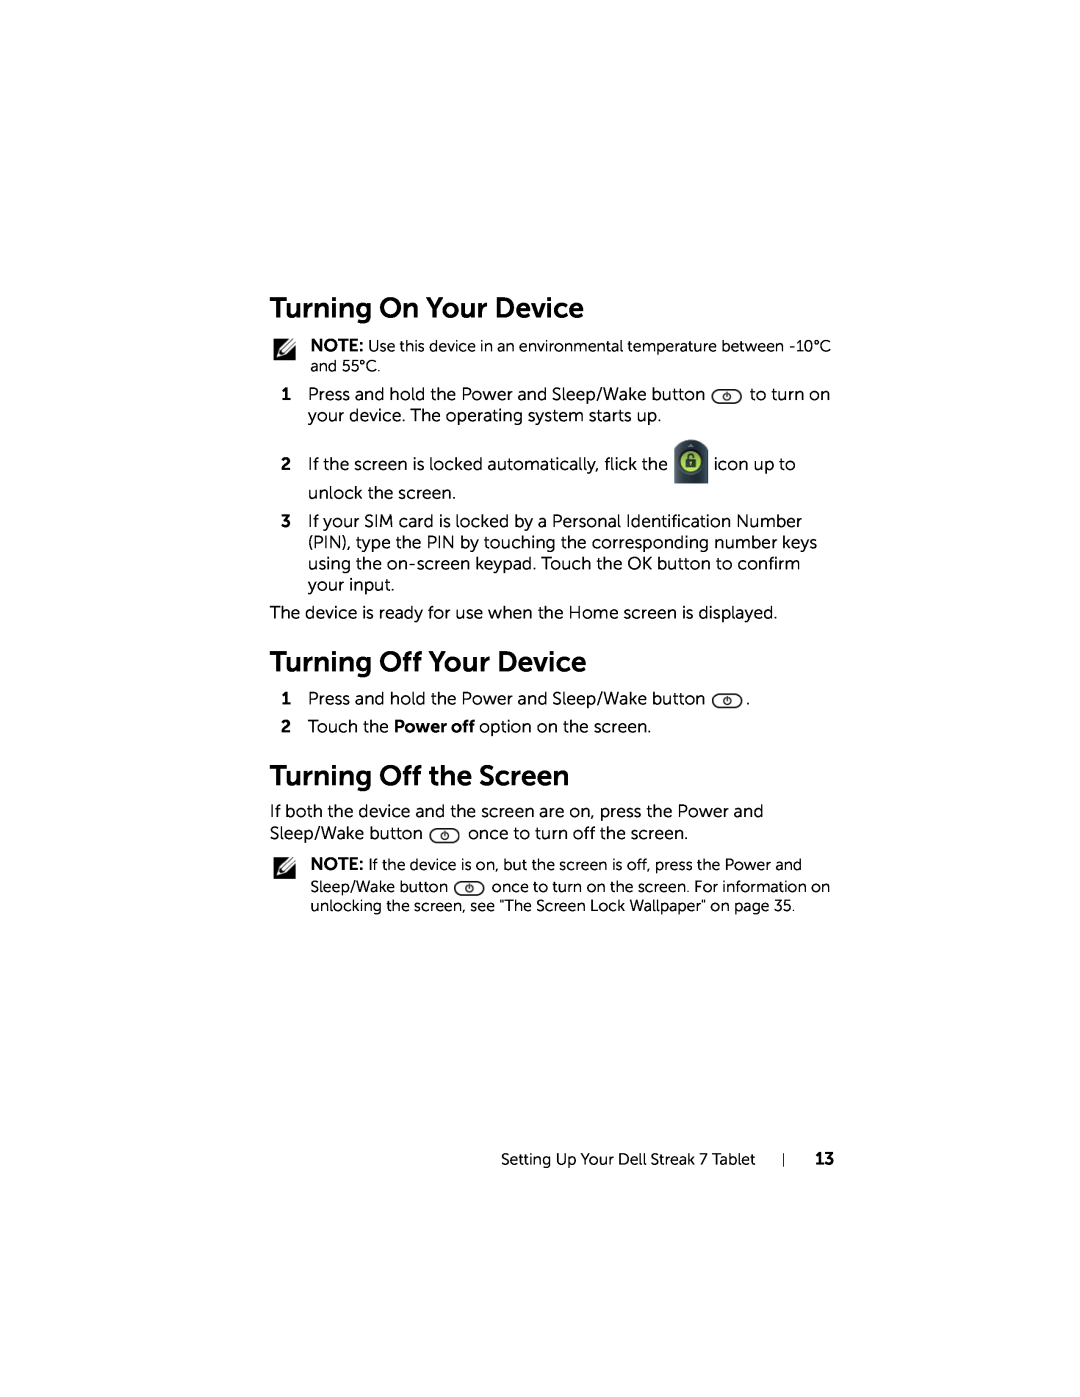 Dell 7 user manual Turning On Your Device, Turning Off Your Device, Turning Off the Screen 